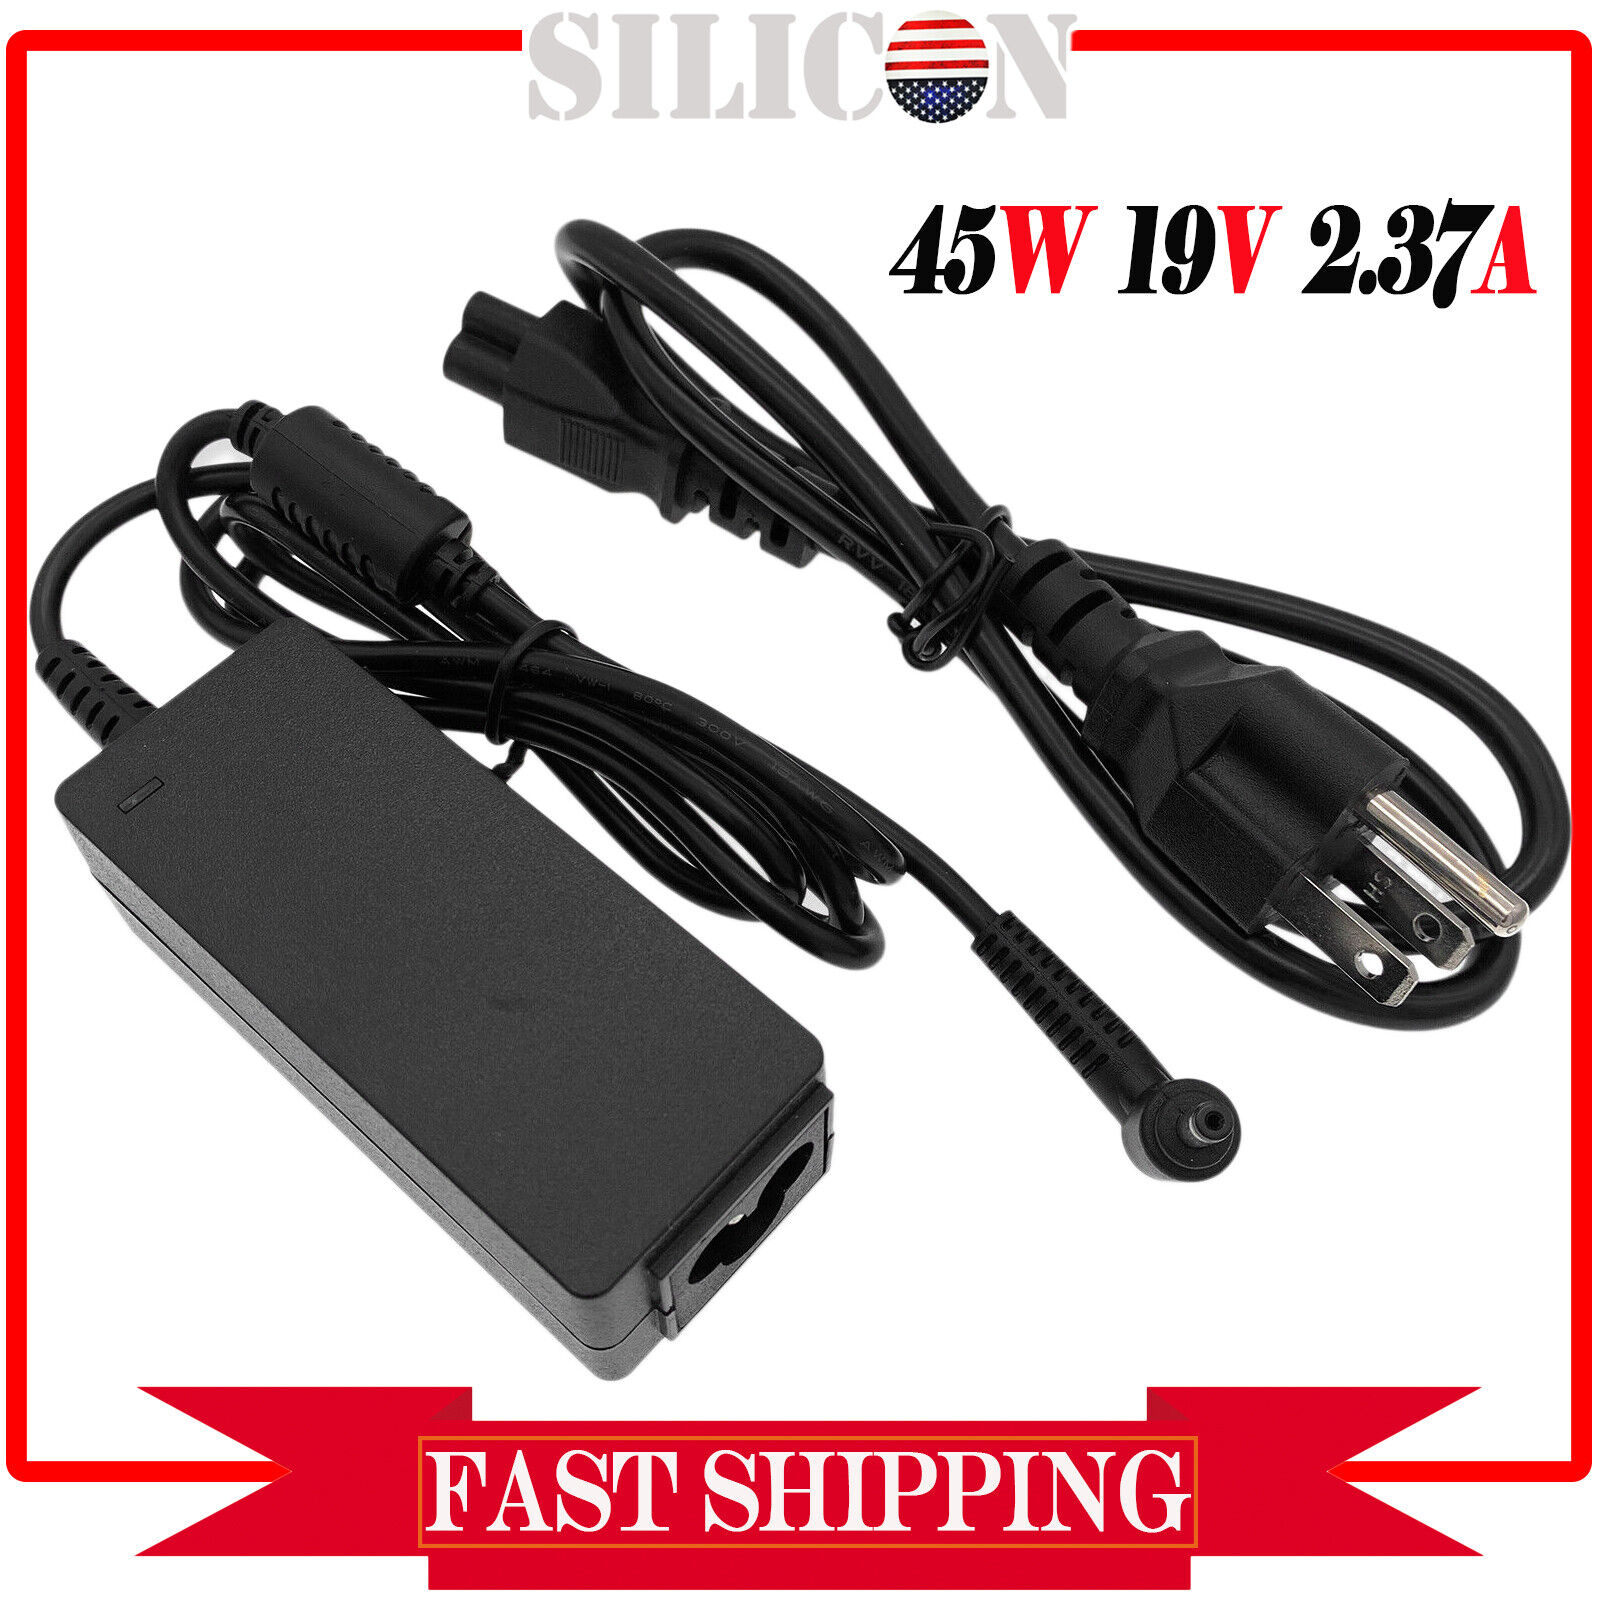 New 45W AC Power Adapter Charger For ASUS E403 E403S E403SA Laptop Supply Cord